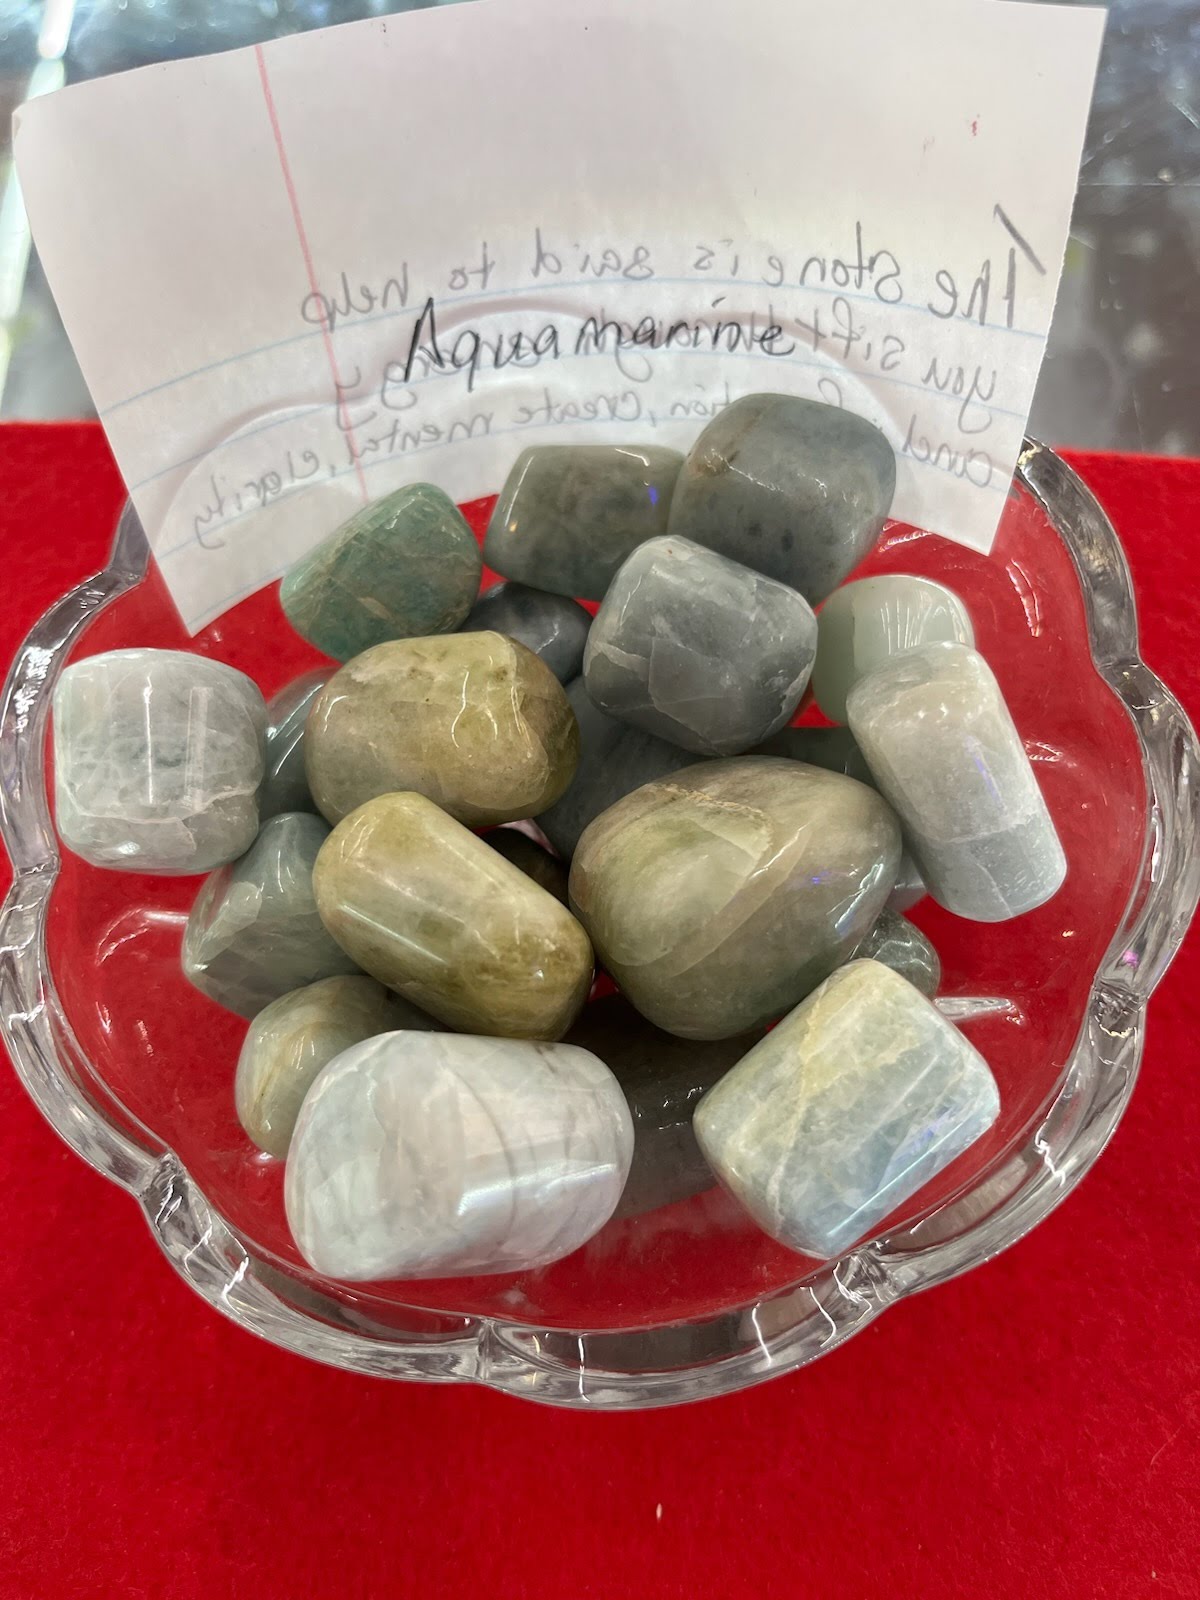 A bowl of rocks with a note on it.